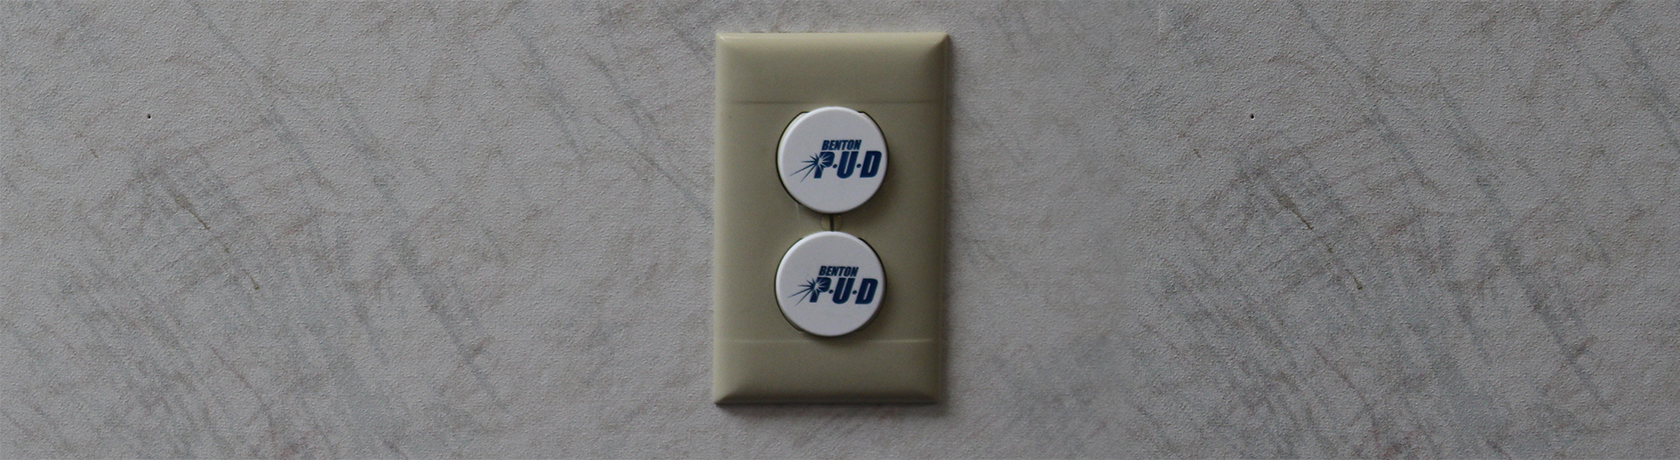 Photograph of an electrical outlet with Benton PUD outlet covers.